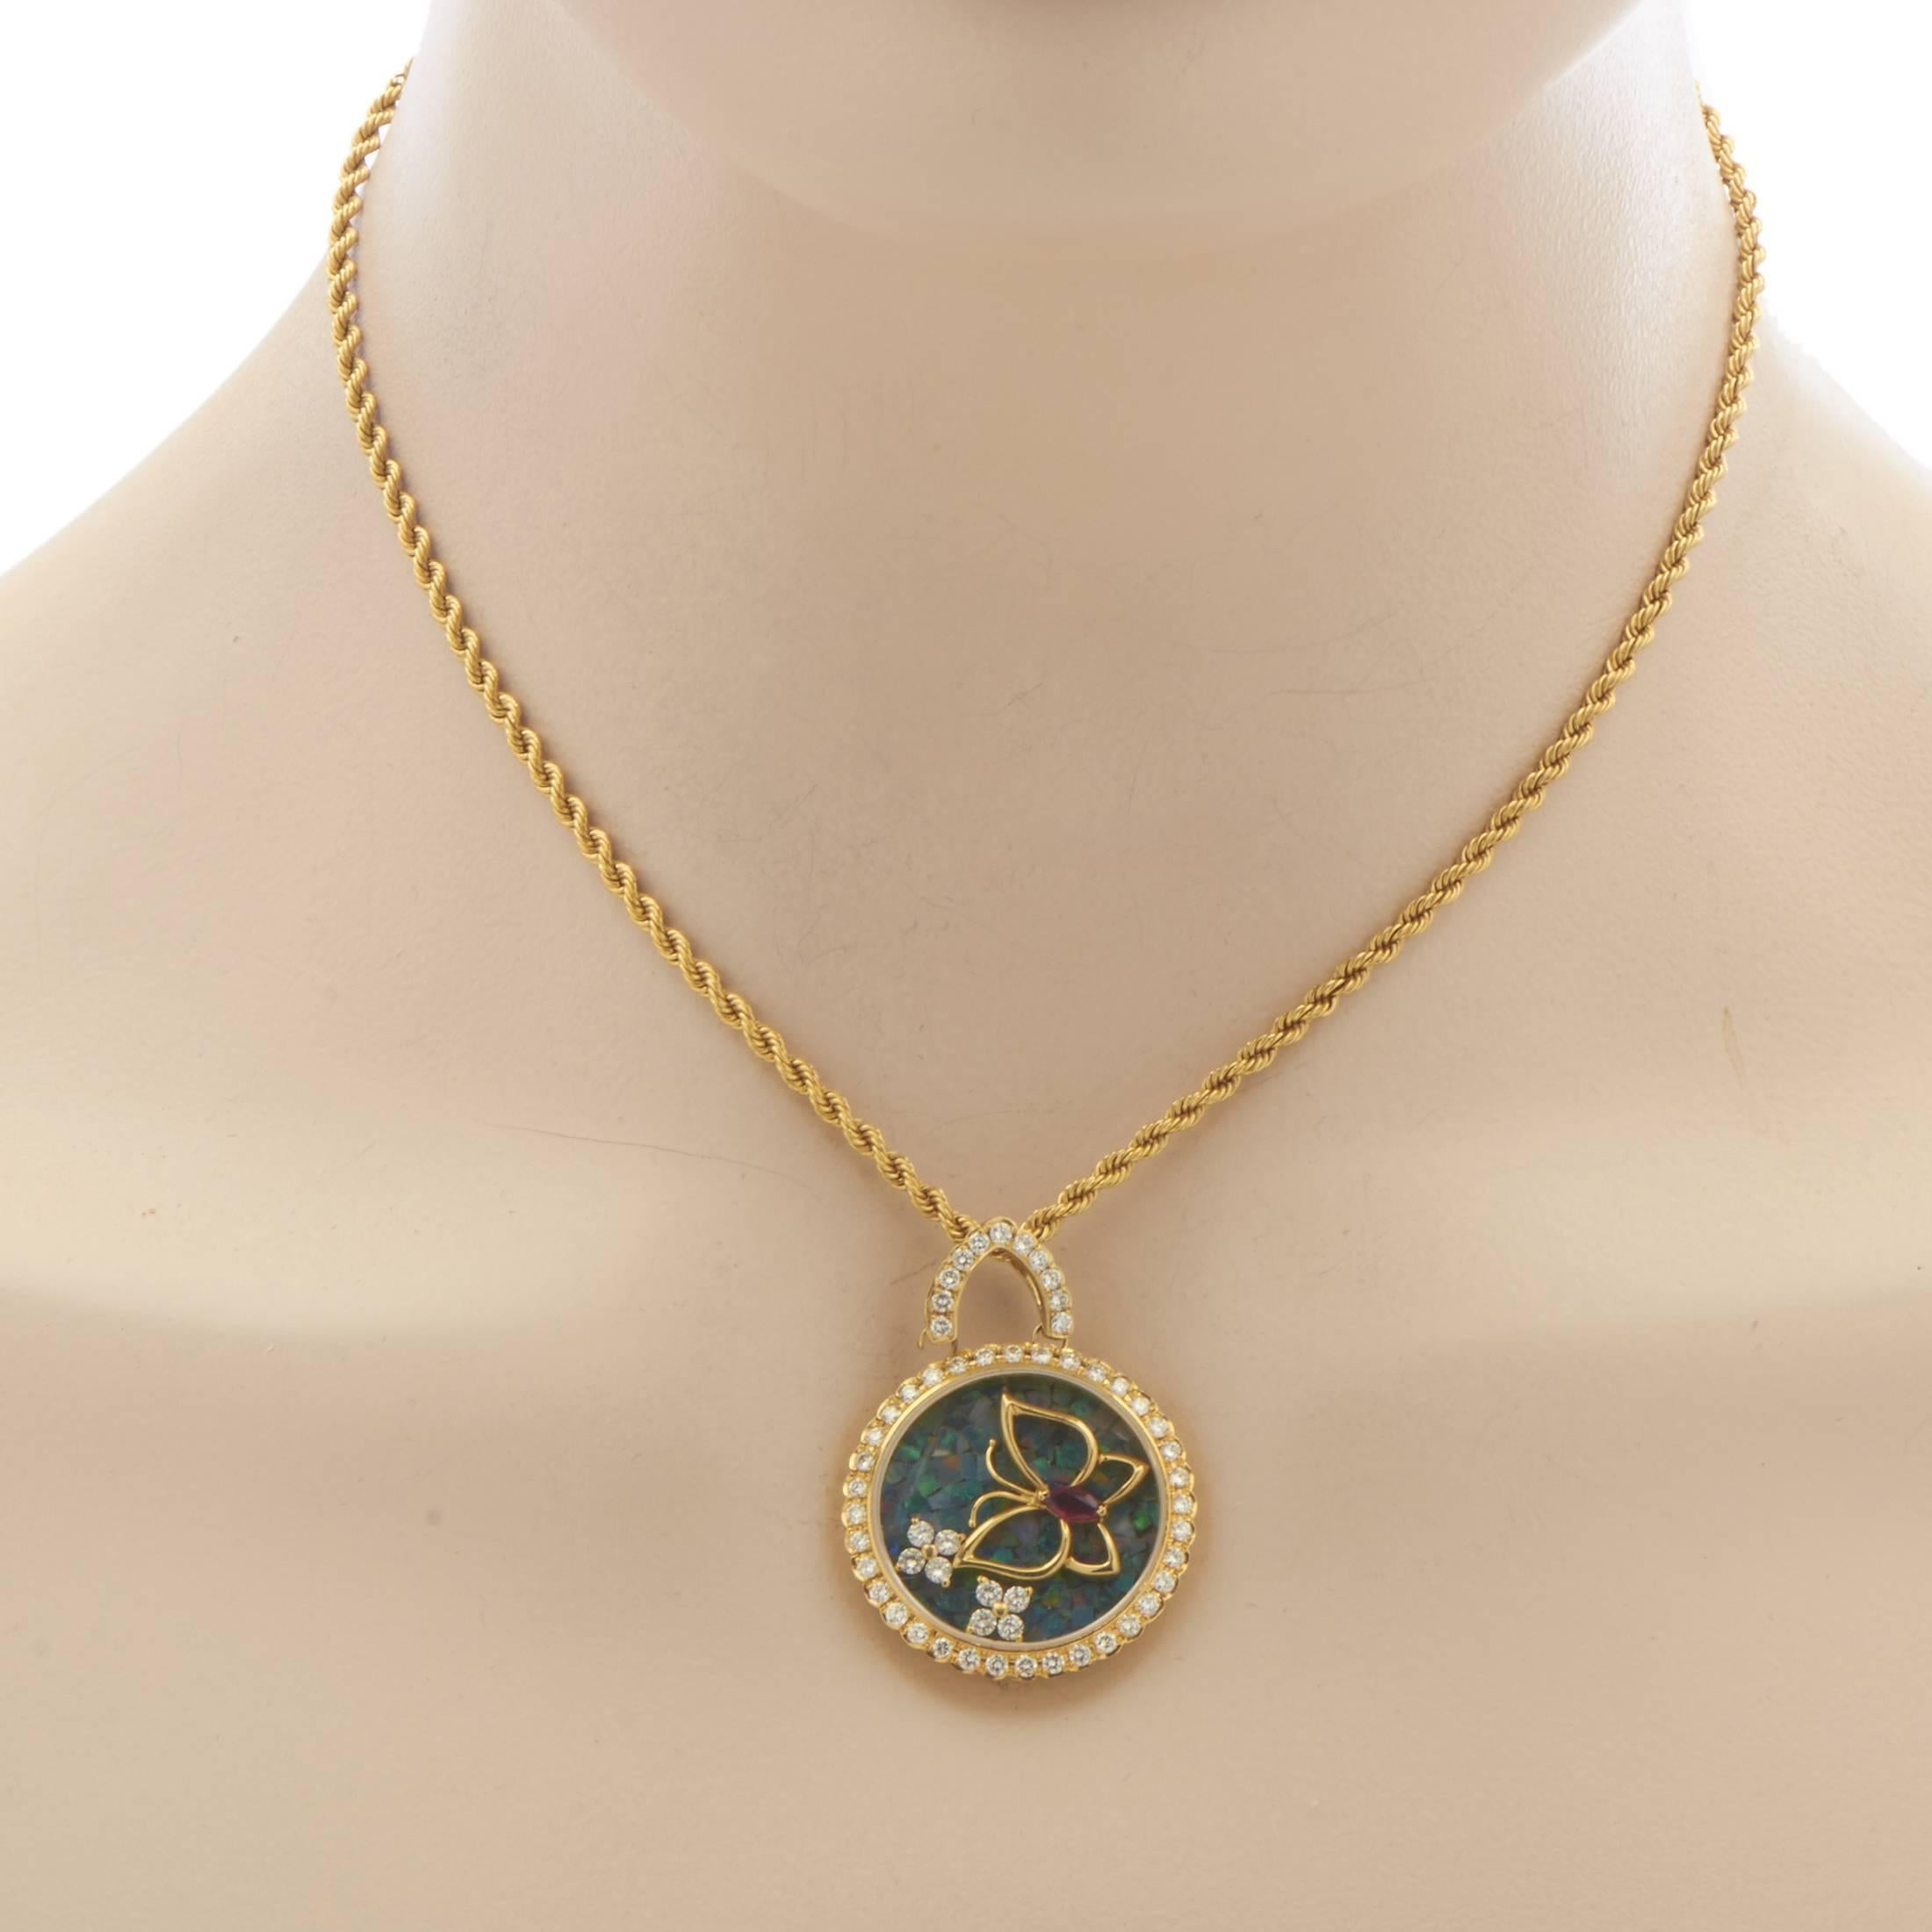 
Employing magnificent opal, a marquise cut ruby, and lustrous diamonds weighing in total approximately 1.30 carats, this exceptional 18K yellow gold necklace from Waltham boasts spellbinding décor that centers around the adorable butterfly motif